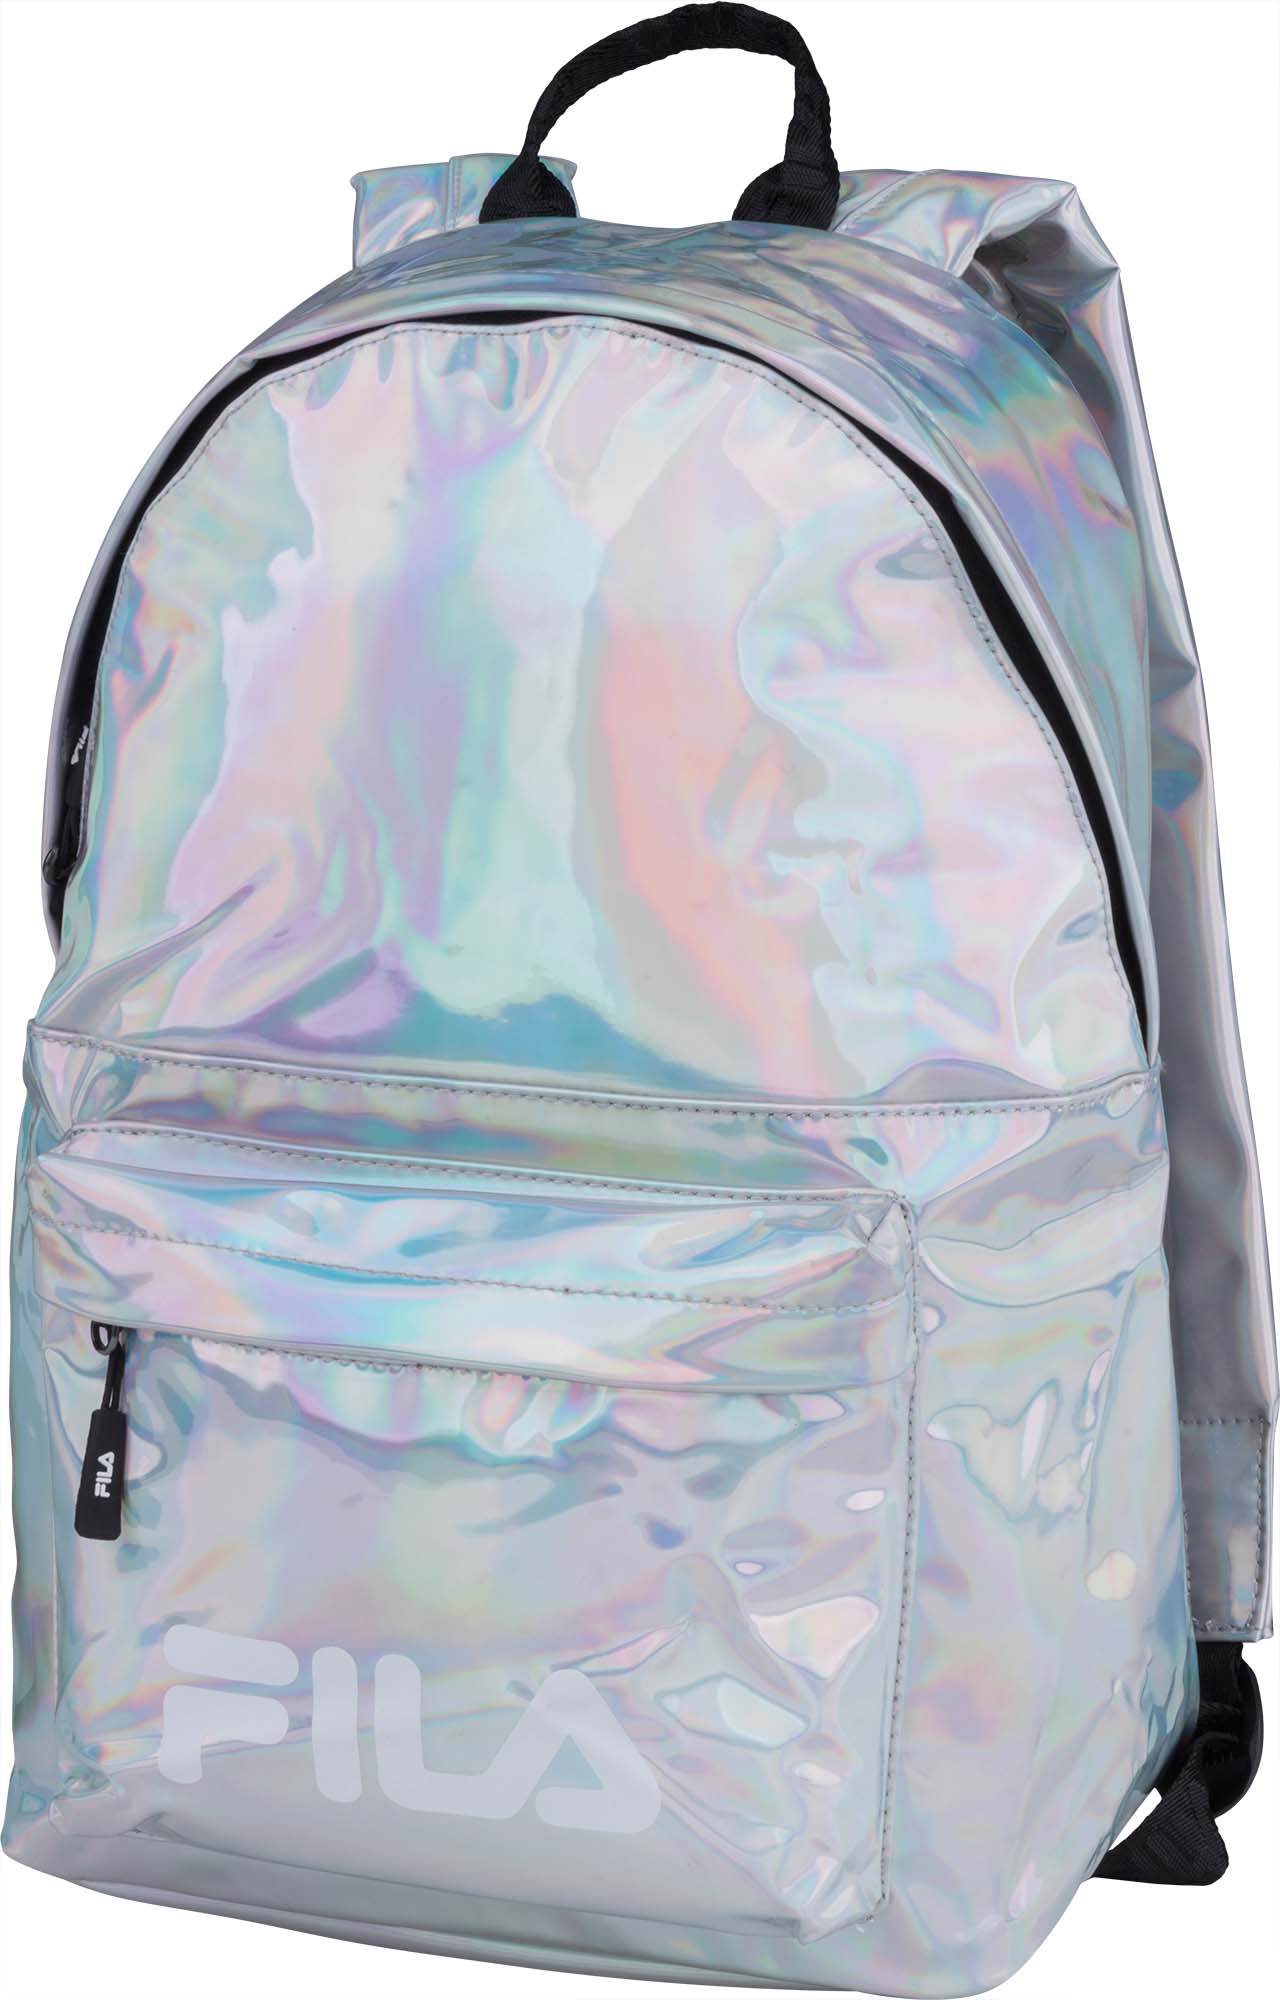 Want to Soft feet nightmare Fila NEW BACKPACK S´COOL HOLO | molo-sport.ro